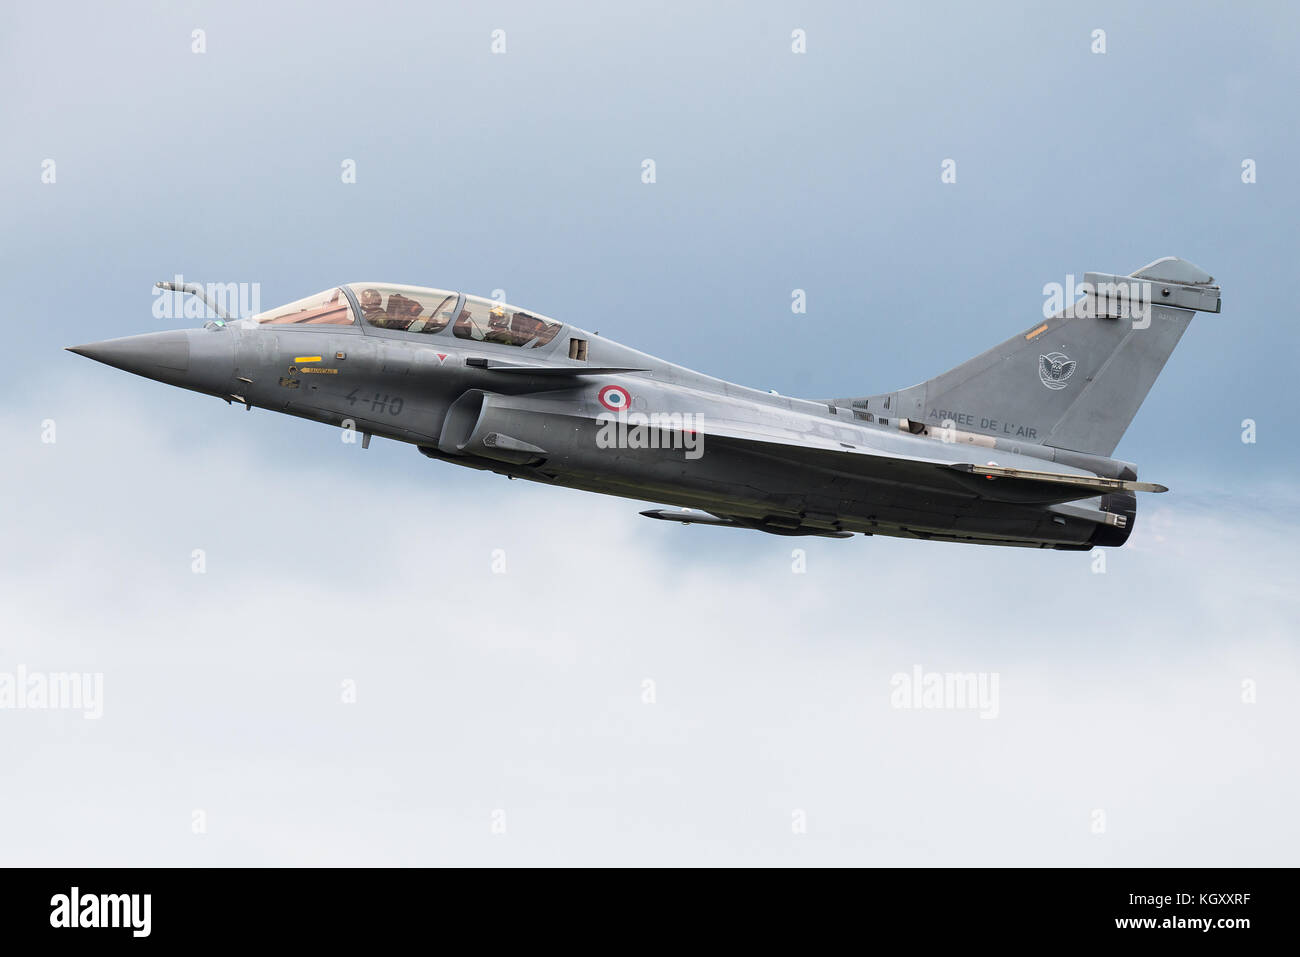 The Dassault Rafale is a twin-engine, multirole fighter aircraft designed and built by the French aircraft manufacturer Dassault Aviation. Stock Photo